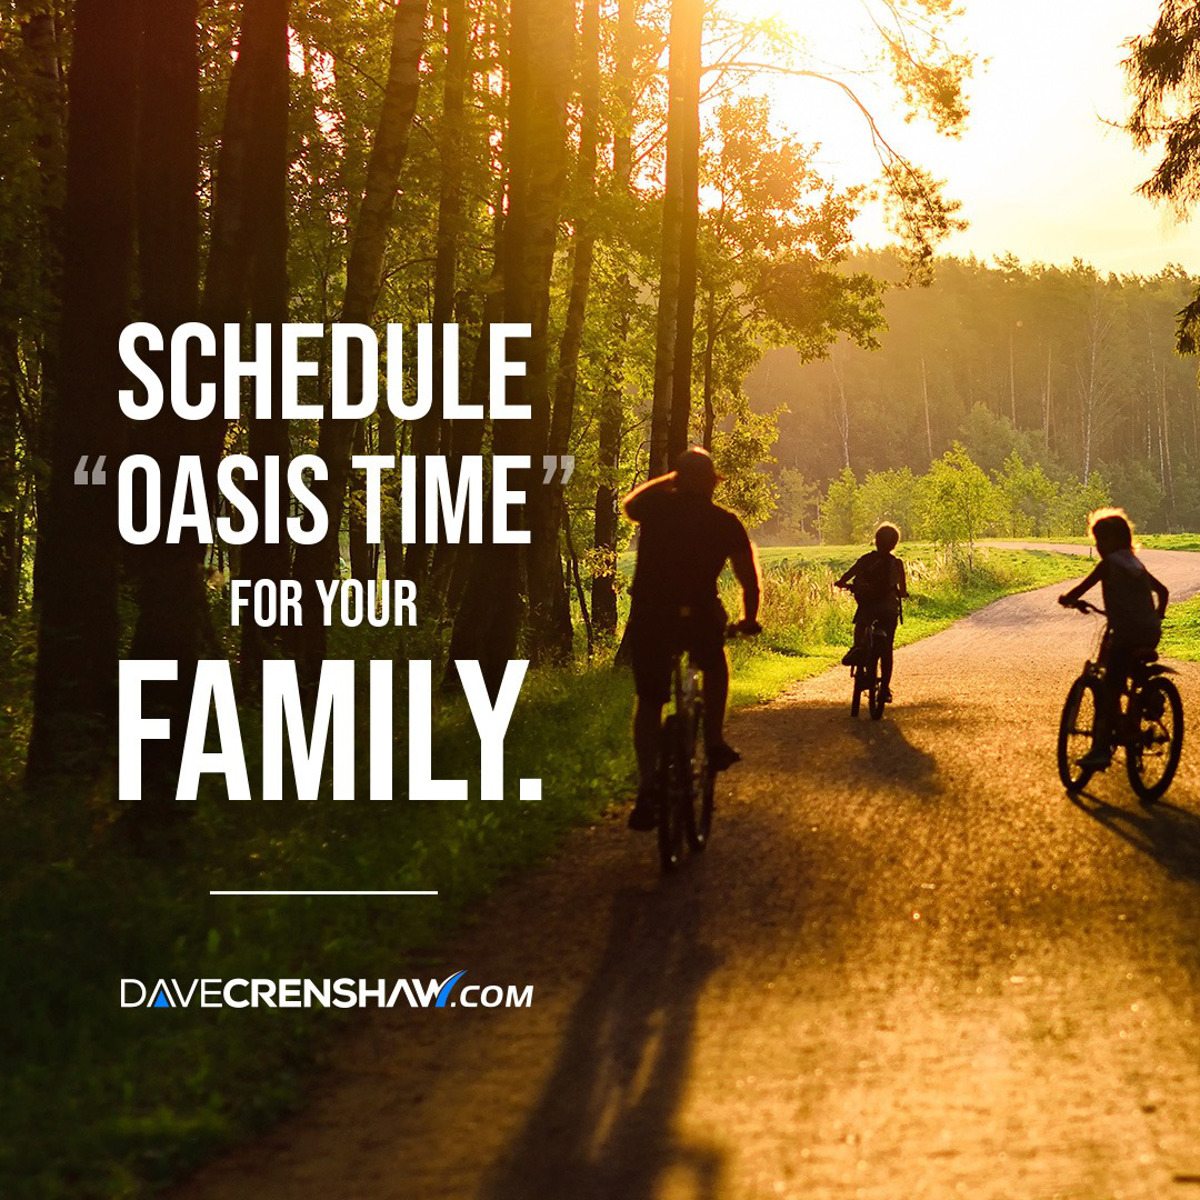 Schedule “Oasis time” for your family